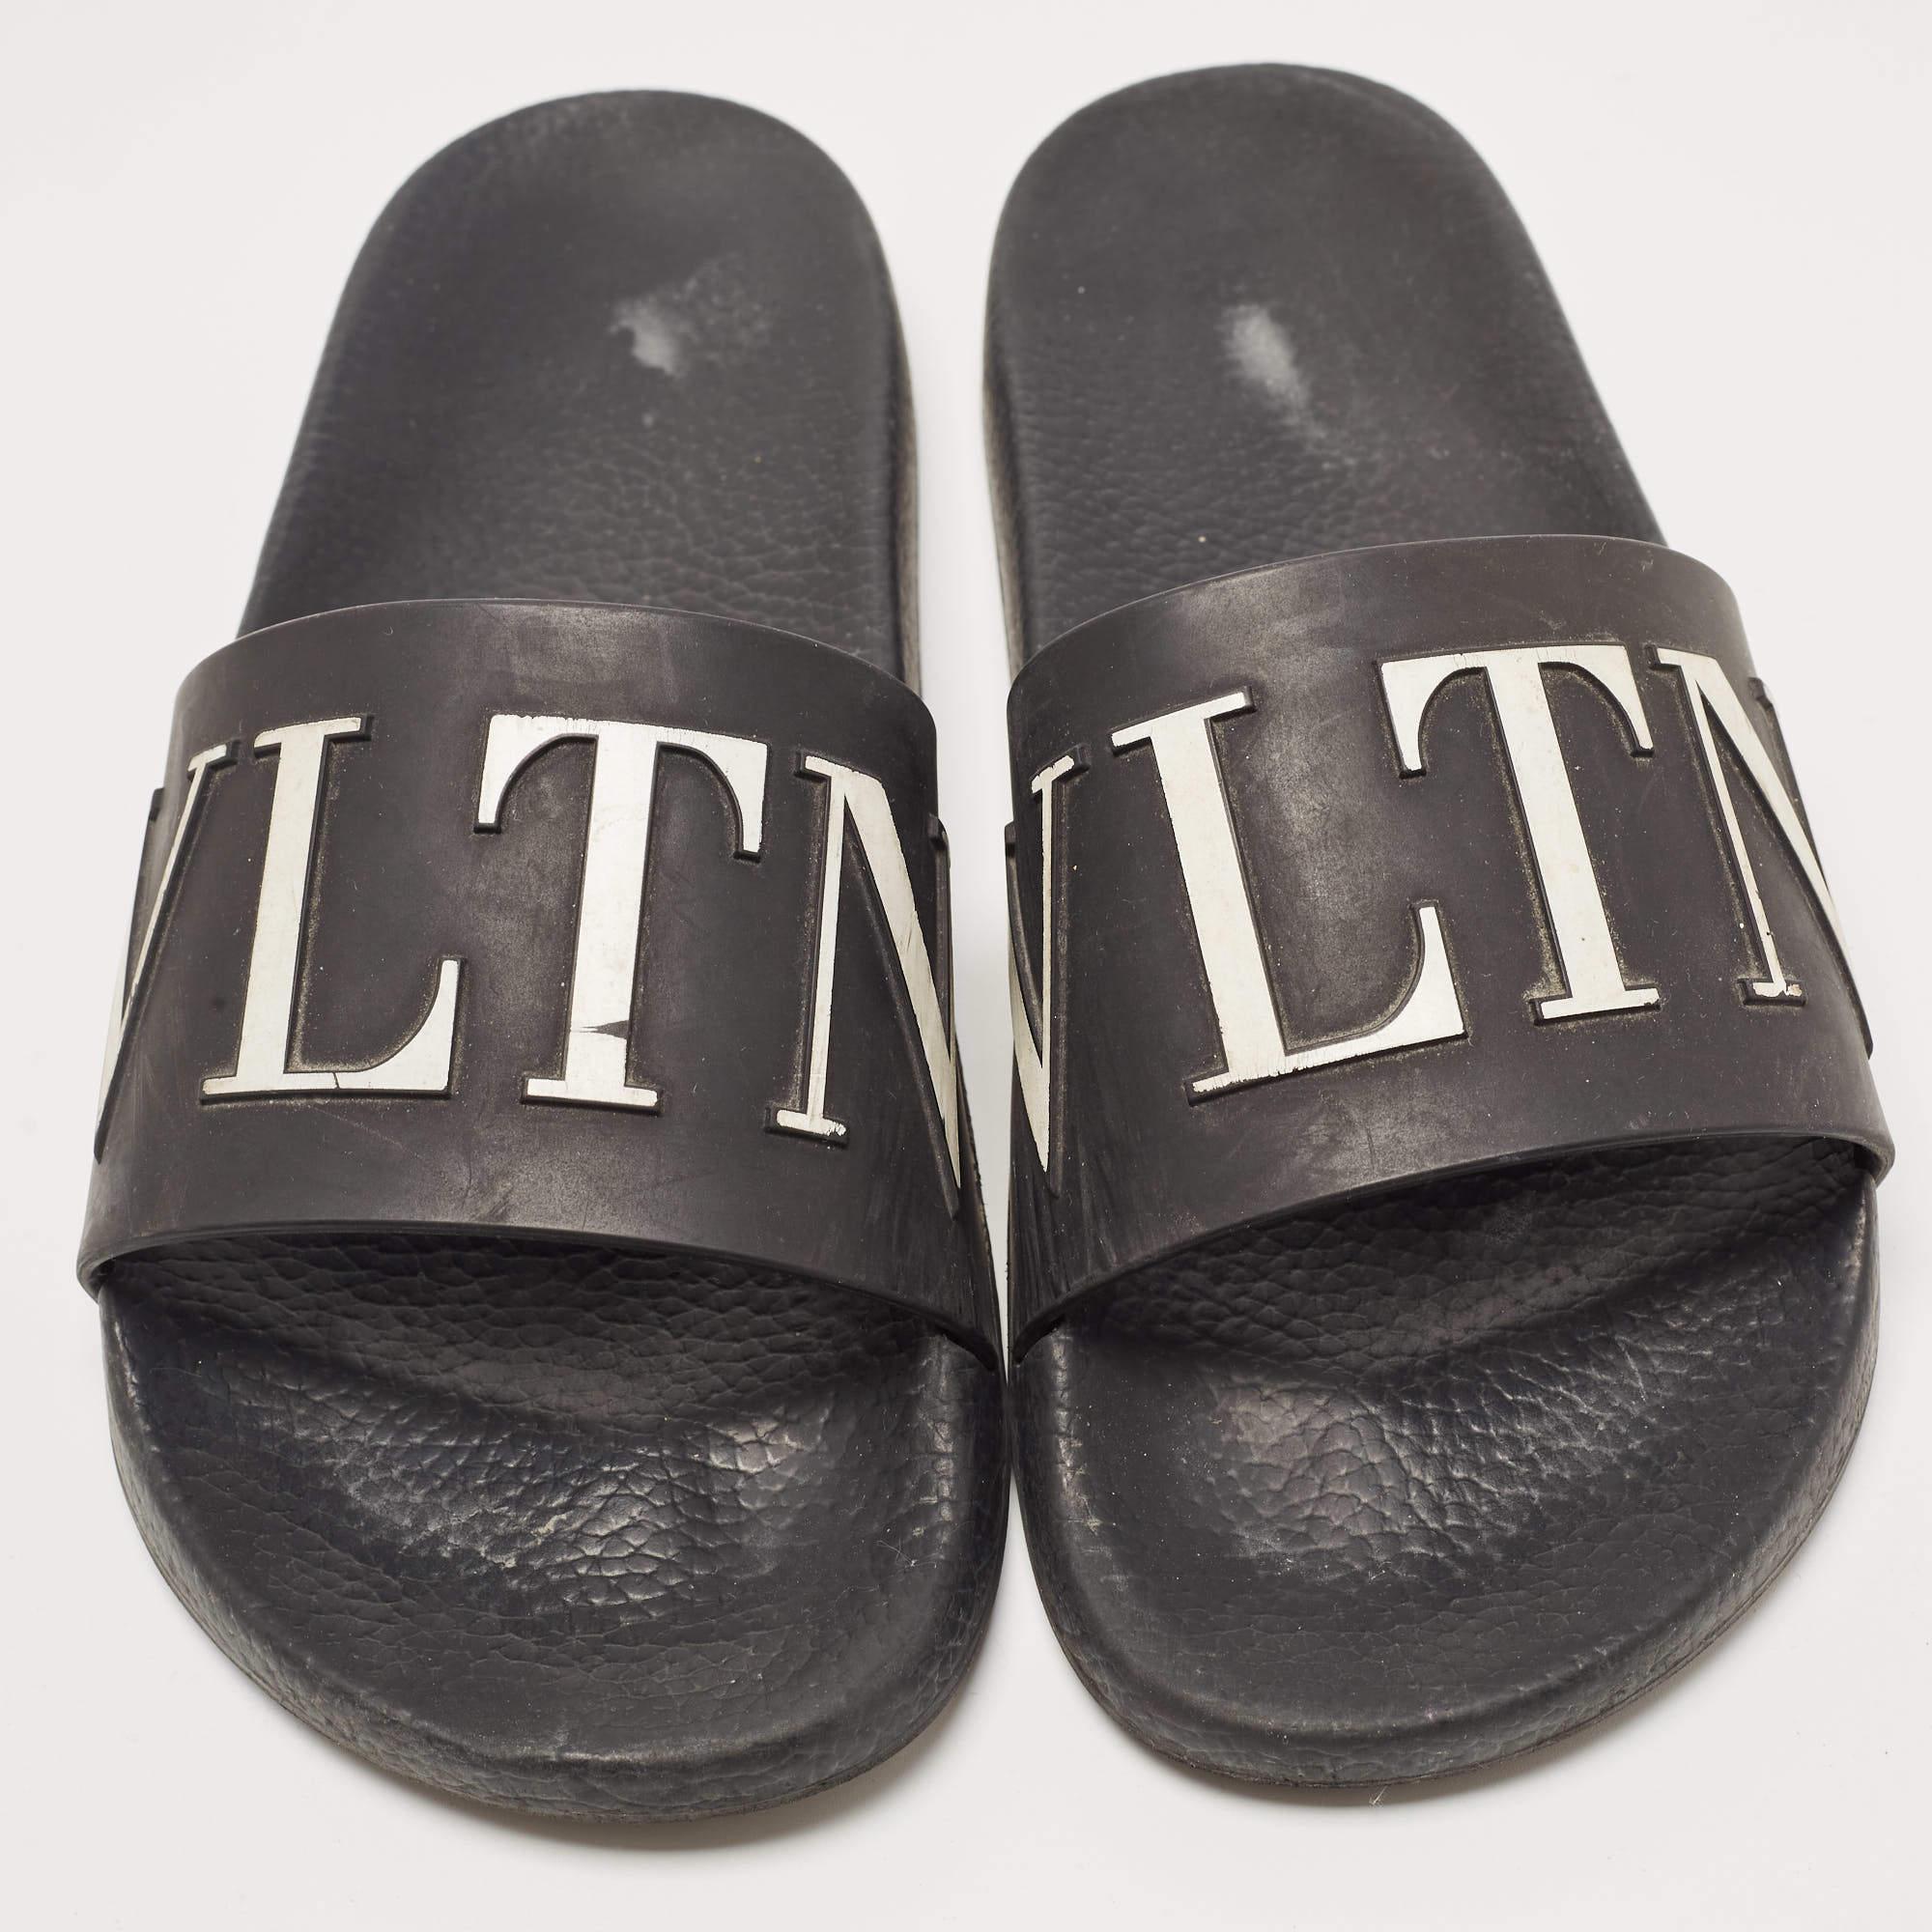 Valentino's rubber slides for women have the VLTN branding on the uppers. They're perfect for the beach, vacation days, or everyday use.

